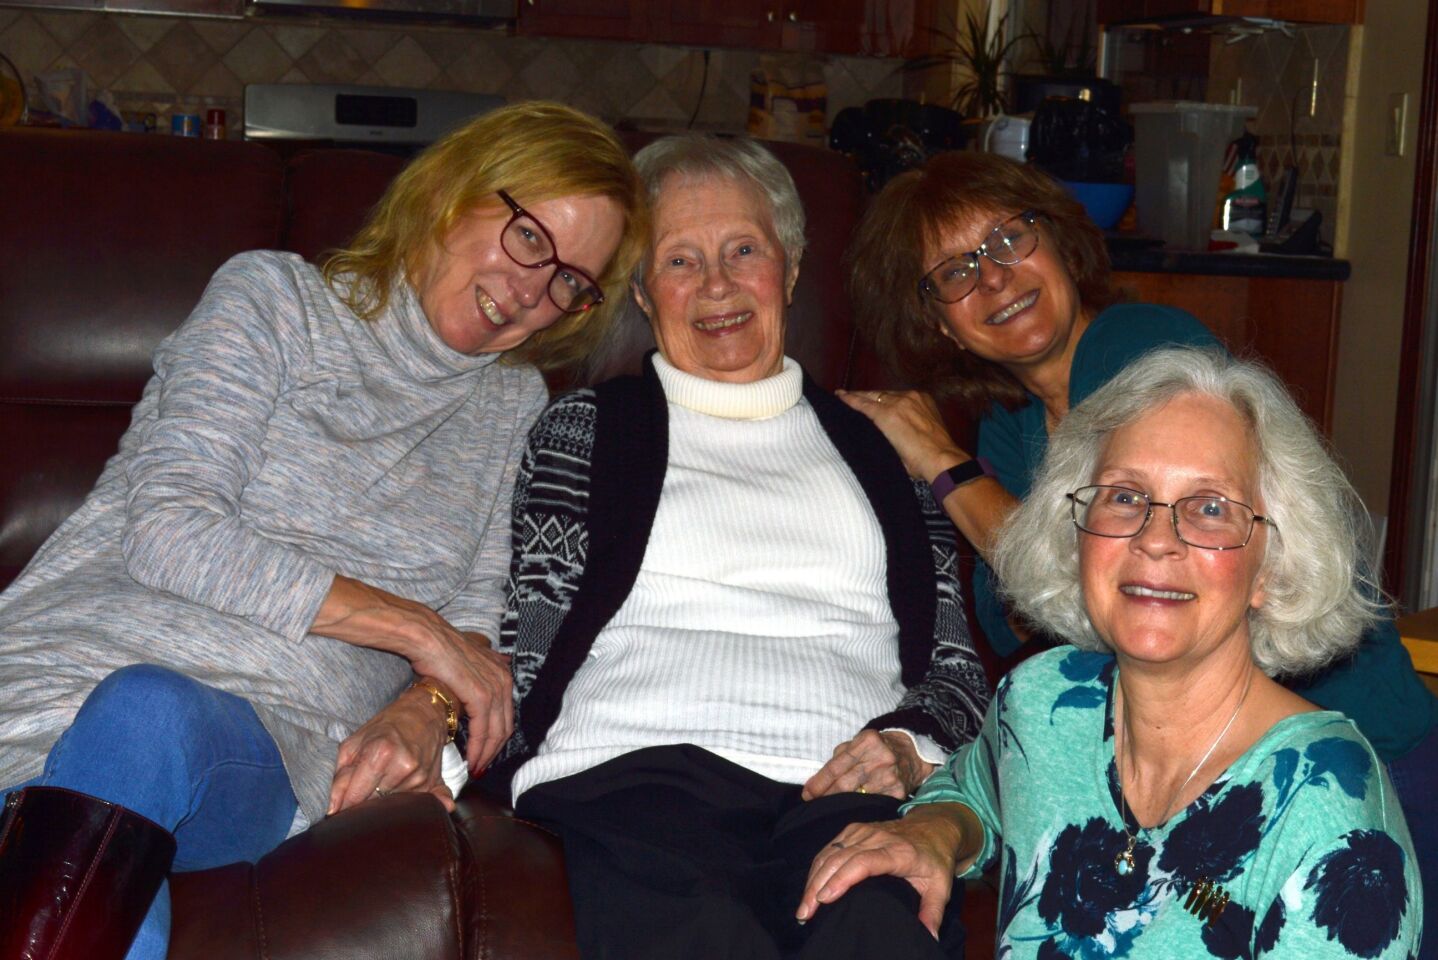 From left to right: Tierrasanta resident Cynthia Leigh sits with her mom, Betty Marks, and sisters Carol Dickerson and Cathy Paredes. The three sisters are the caregivers for Marks, who lives in the Cadence at Poway Gardens memory care facility.